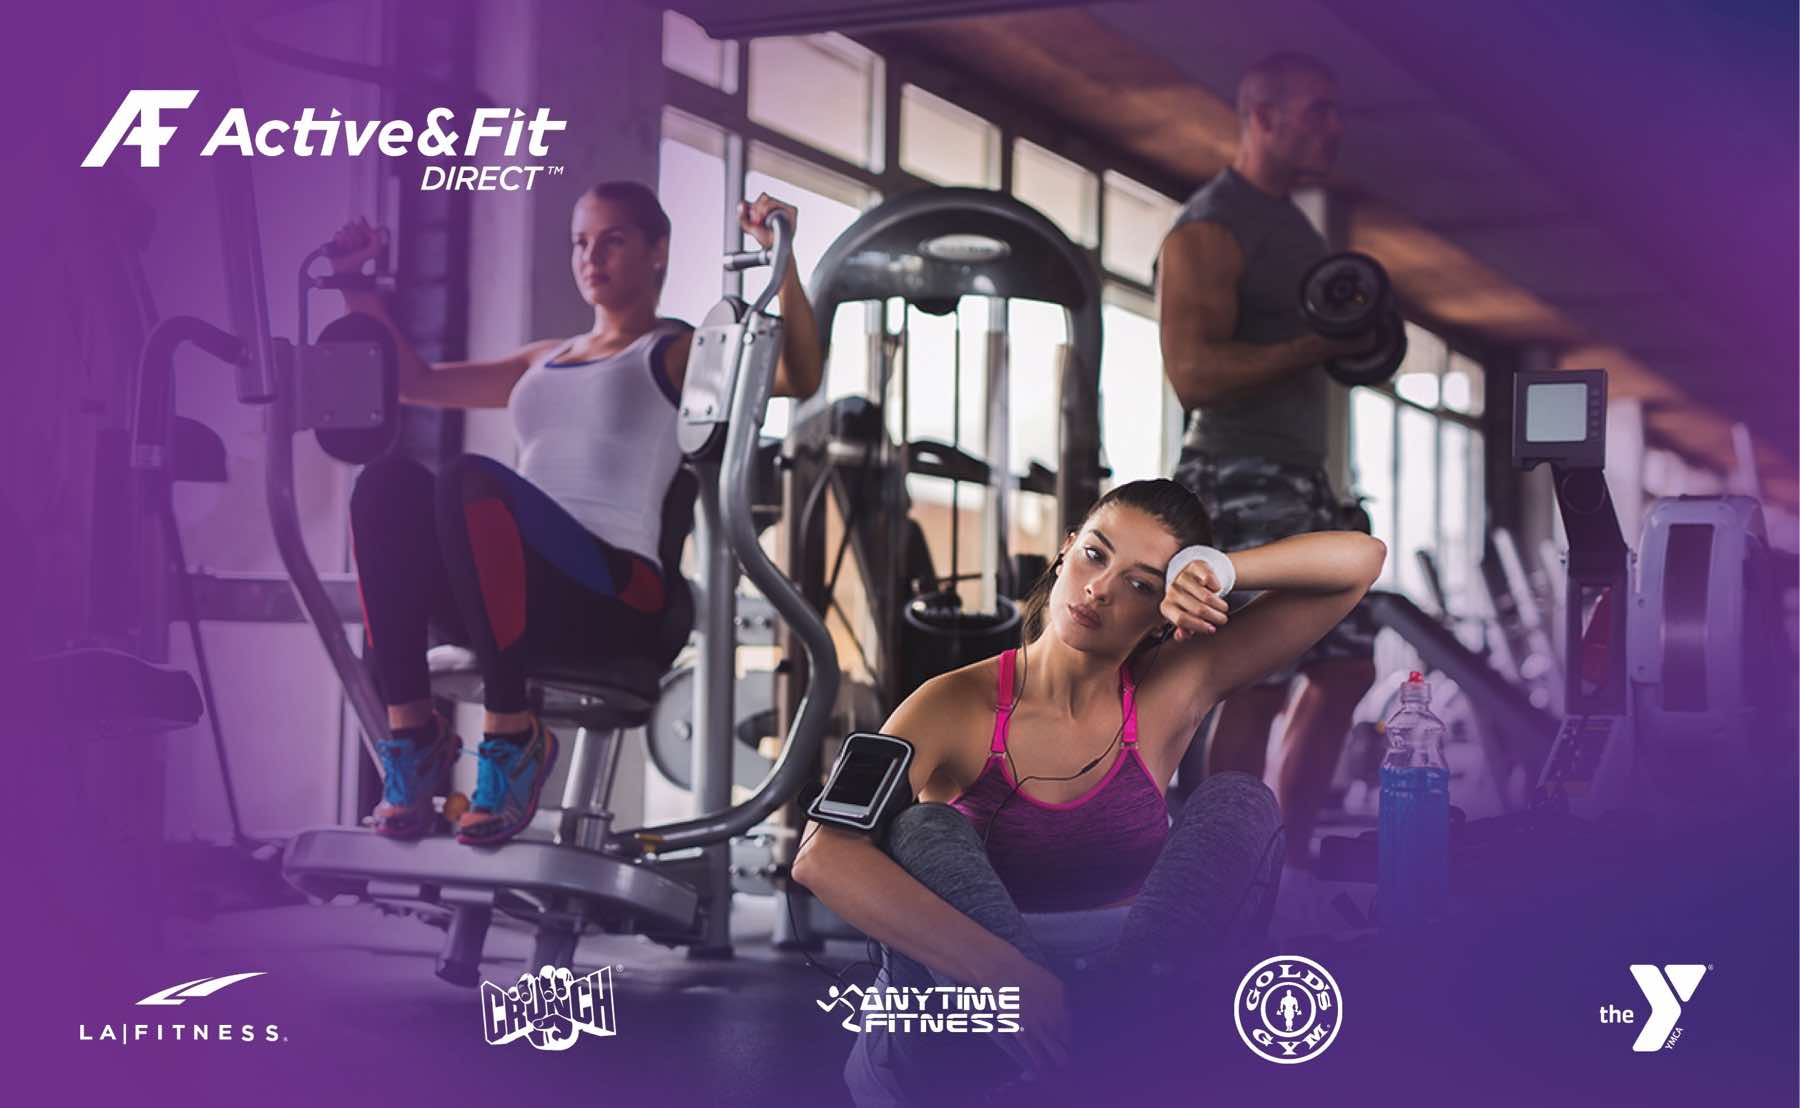 Active Fit Direct graphic with gym logos